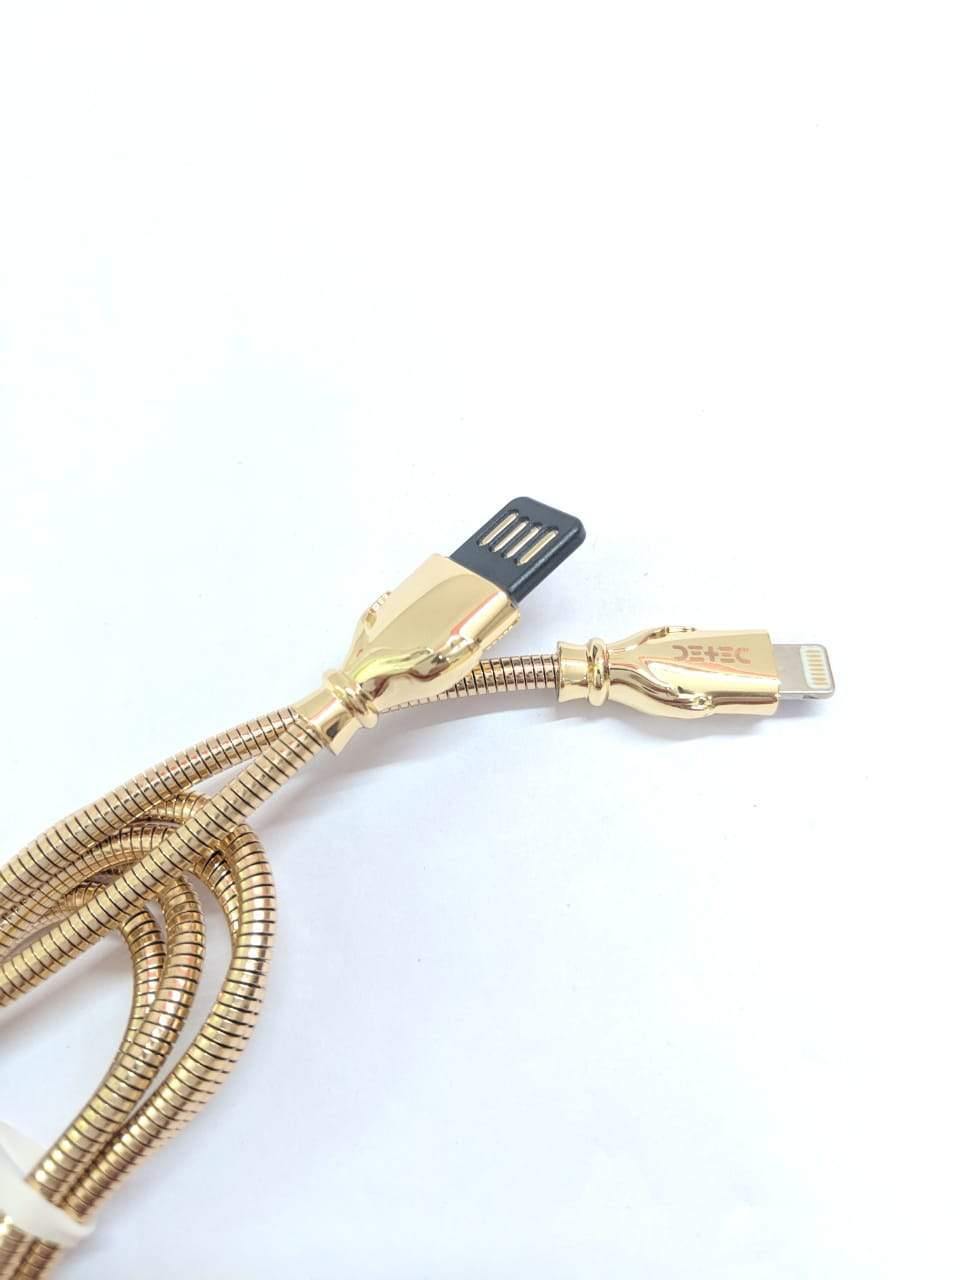 Detec Data Cable - Lightning Gold -  USB 2.0 Type Data Cable - Detech Devices Private Limited